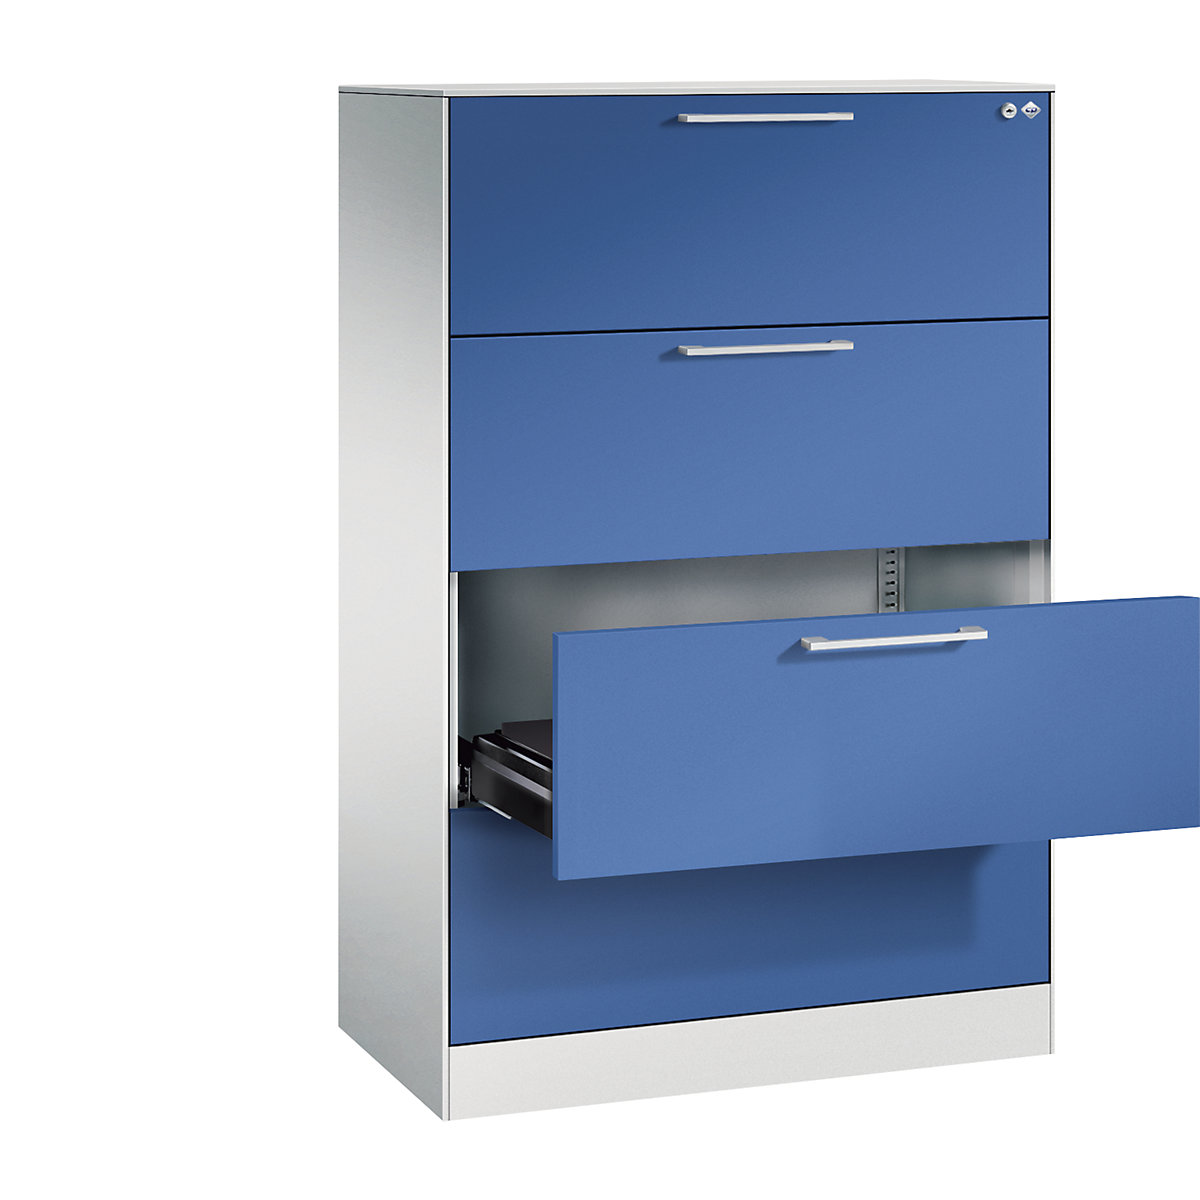 ASISTO card file cabinet – C+P, height 1292 mm, with 4 drawers, A4 landscape, light grey/gentian blue-8